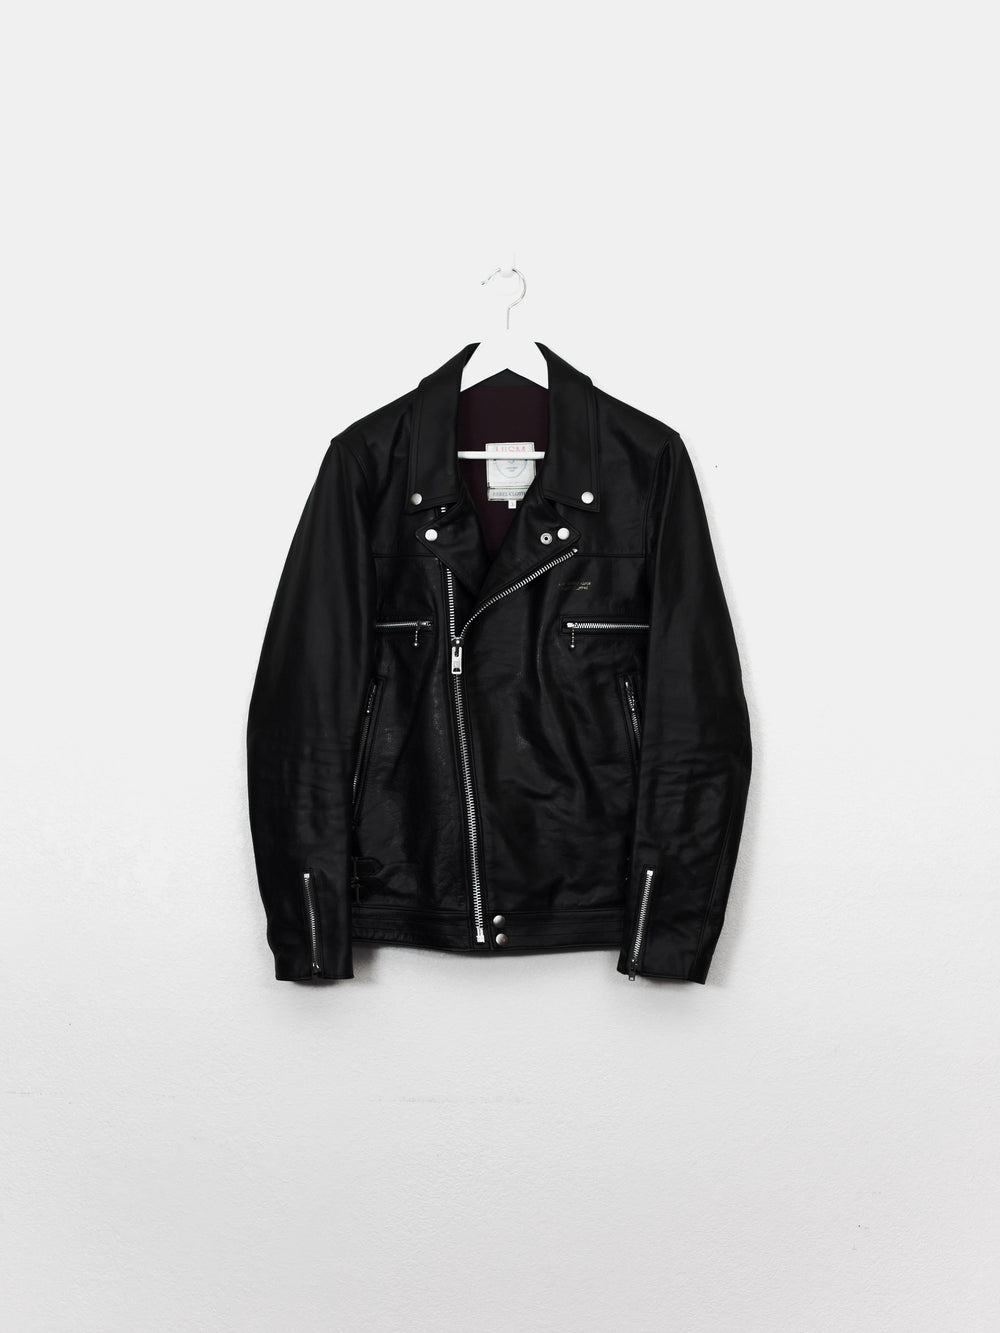 Undercover SS14 WMNNC Double Rider